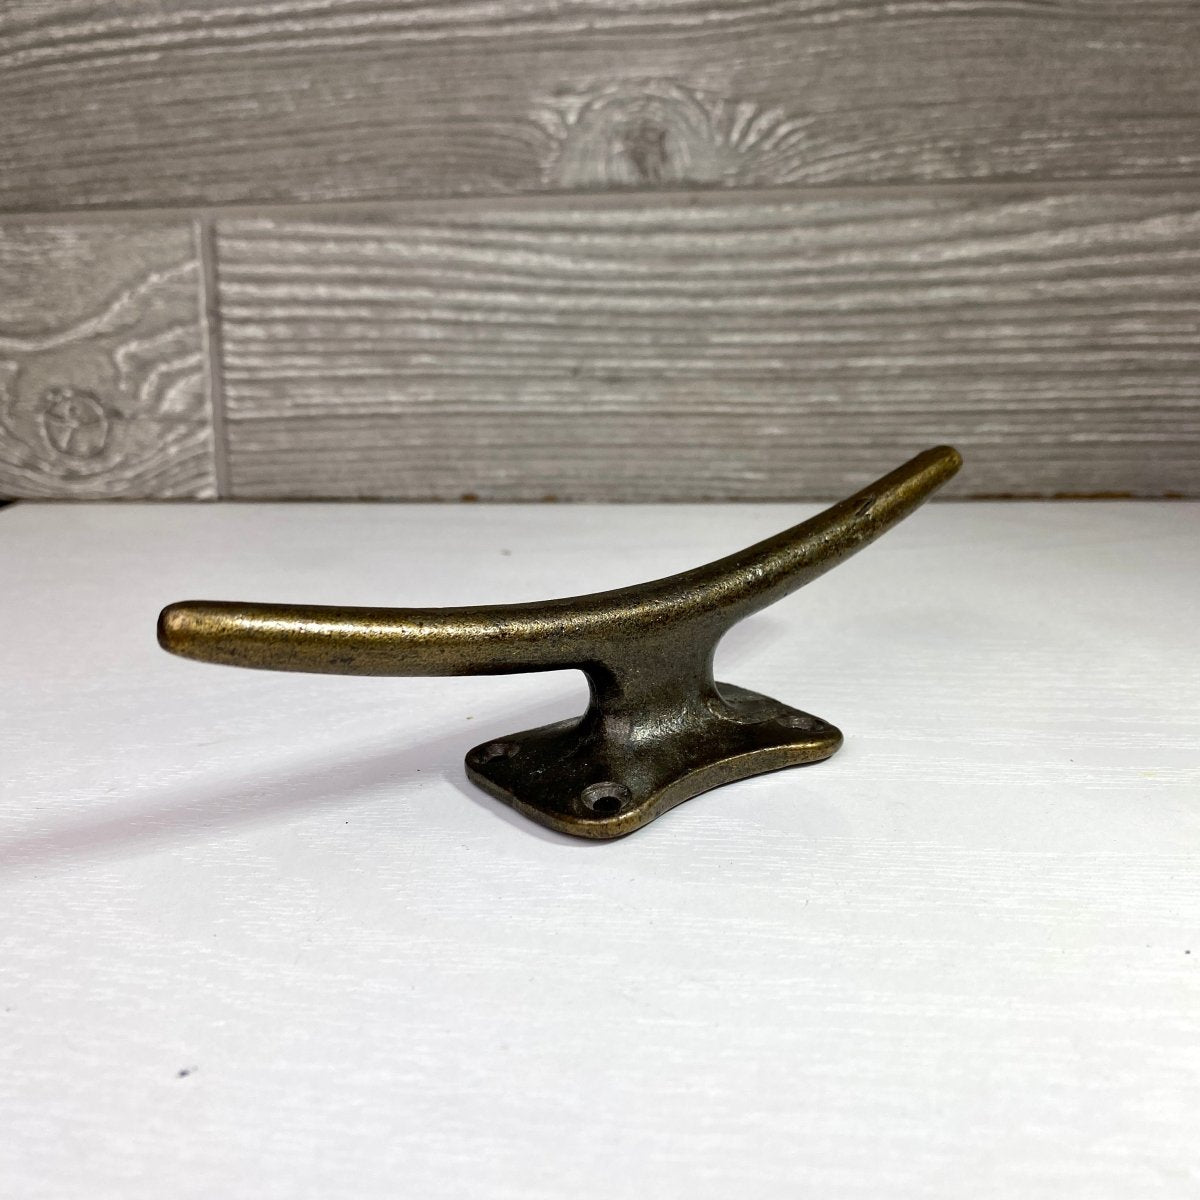 Cleat Wall Hook - Drawer Pull - Gift for Sailor - Lake Beach House